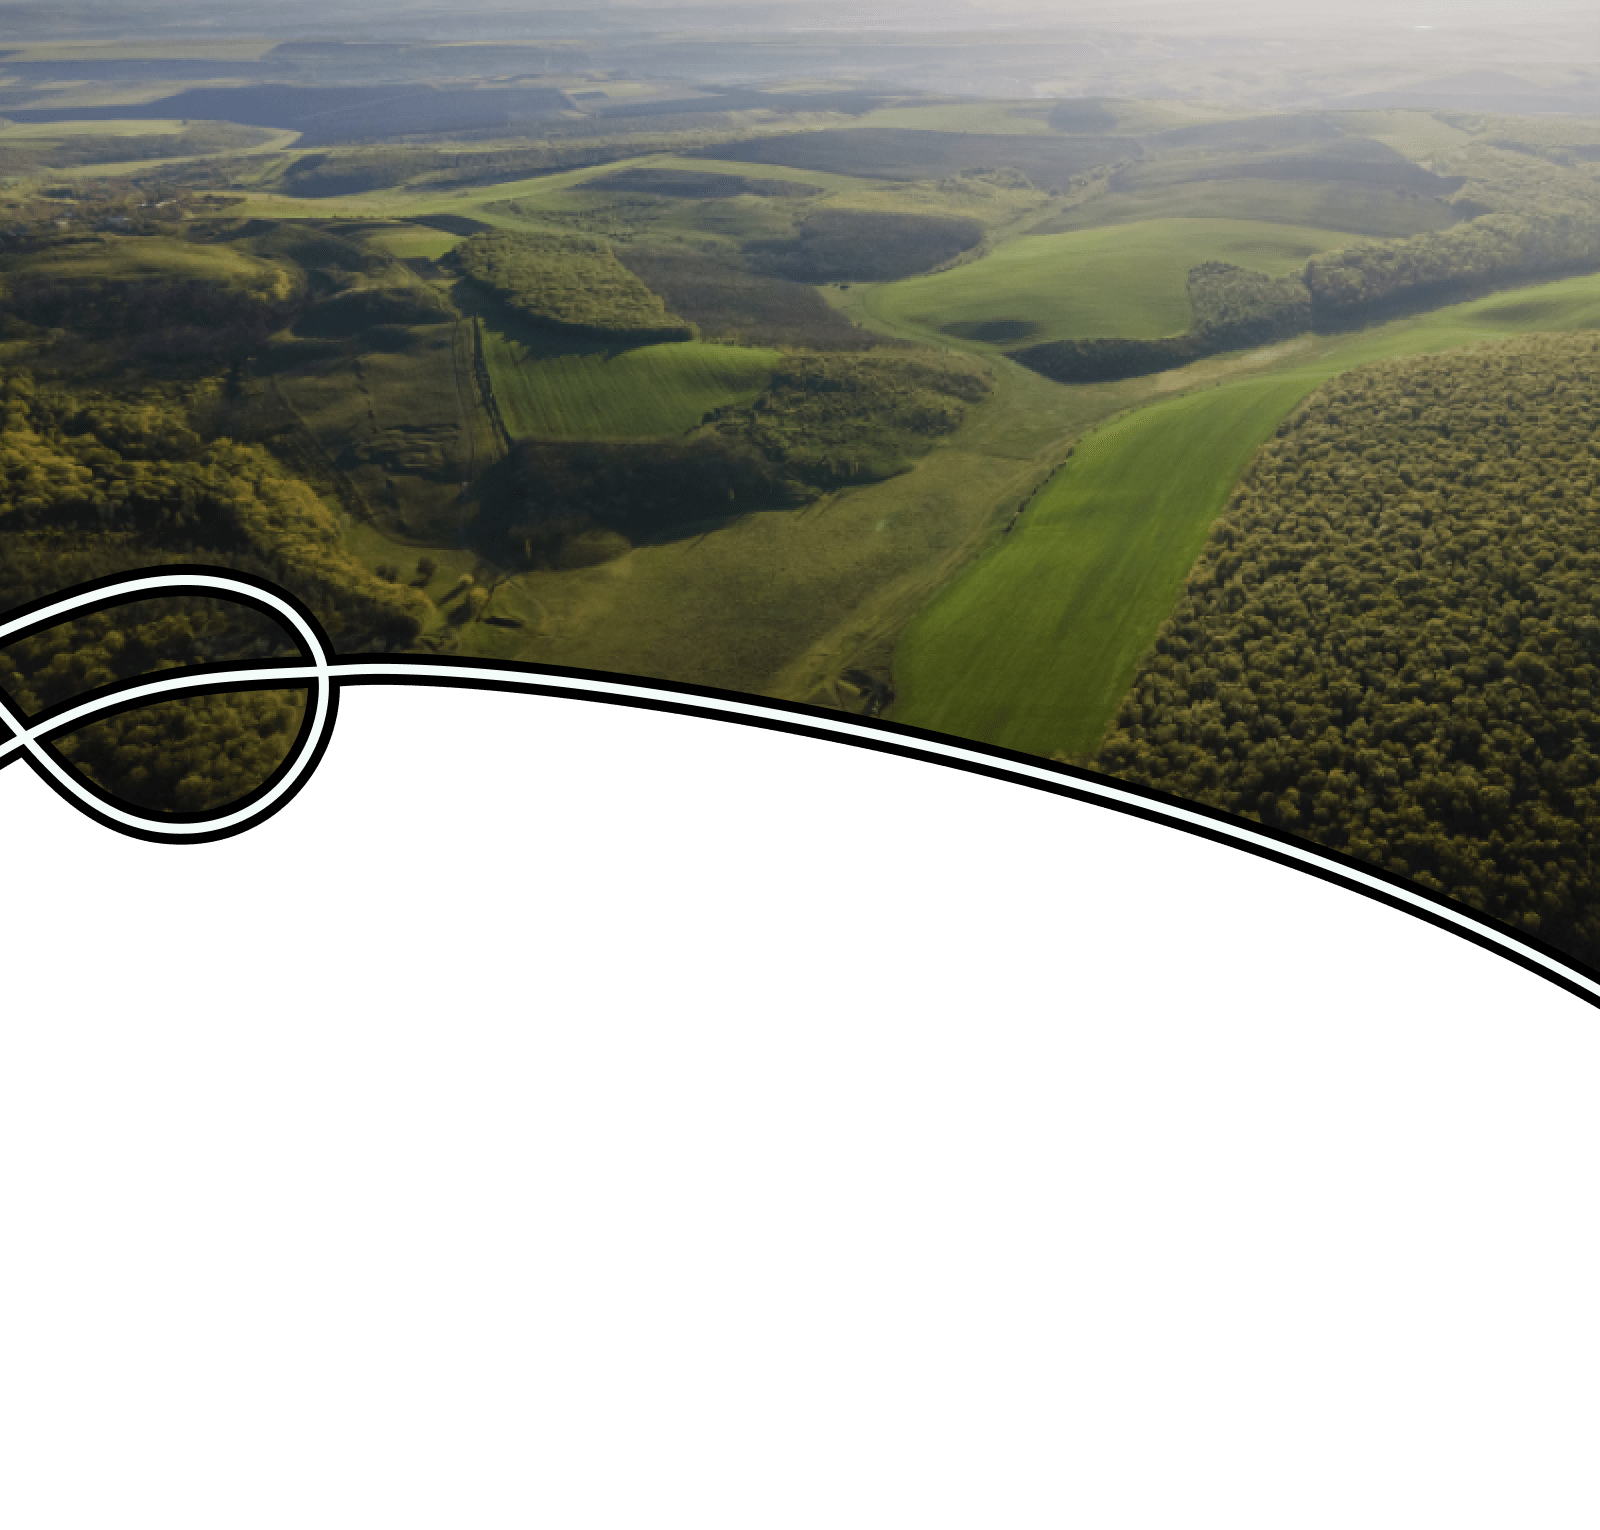 In an aerial image, a slight haze clings to a lush green landscape with rolling hills under a blue sky. The landscape is a mix of dark green forest and irregular bright green patches carved out by agricultural activity.